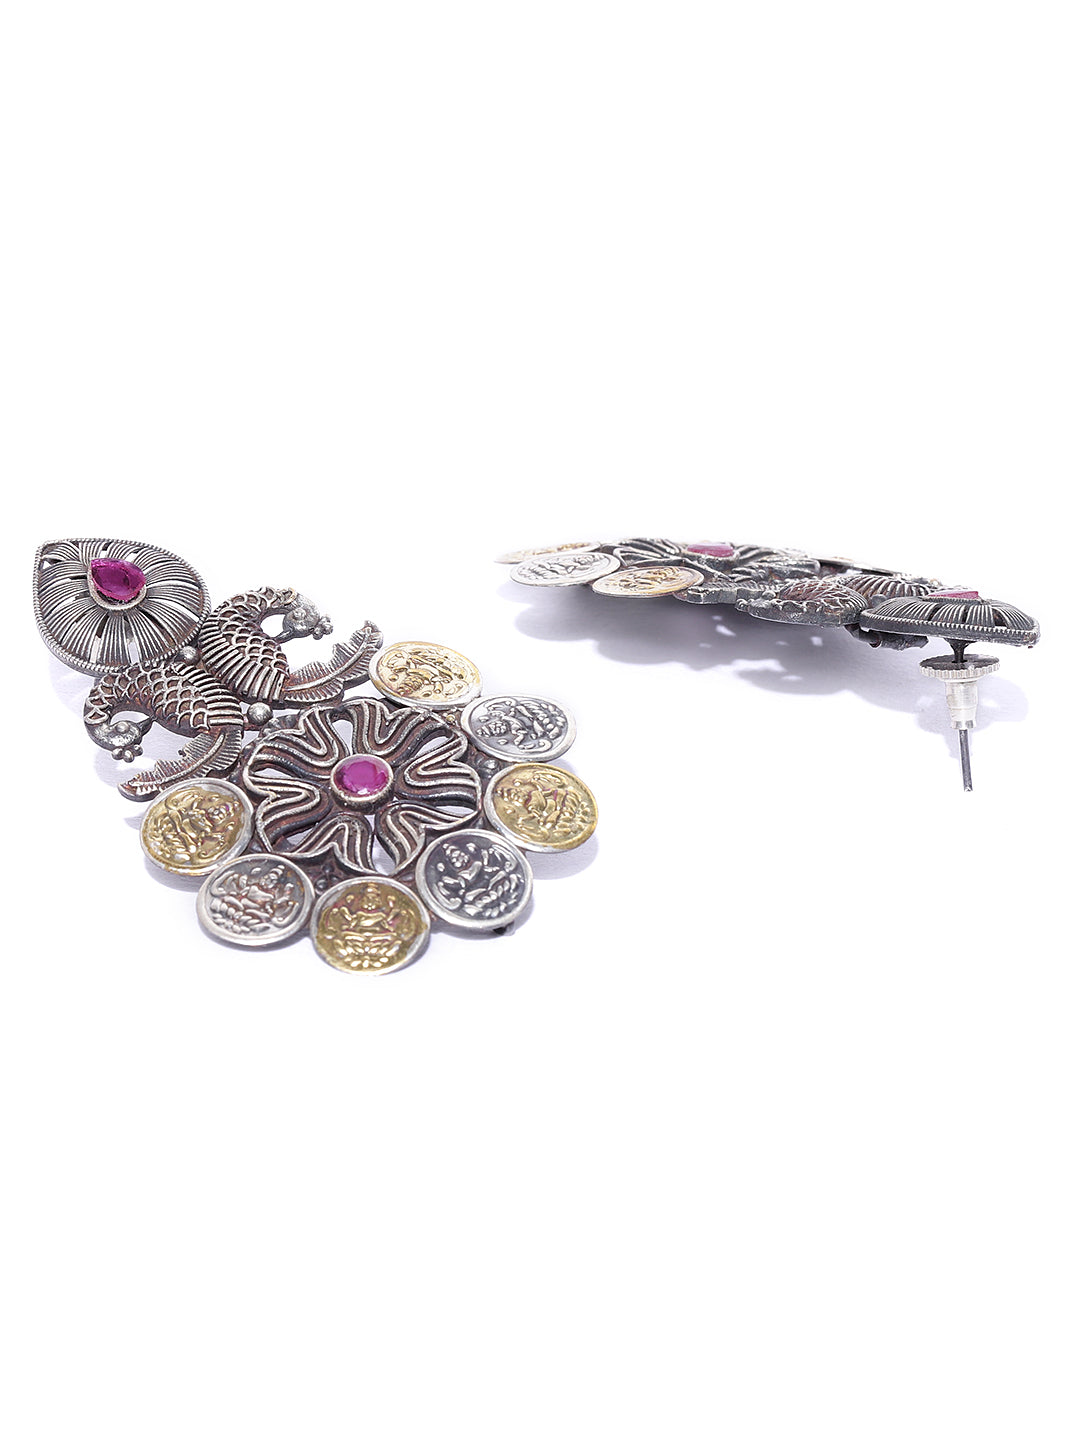 Oxidized Dual-Toned Magenta Stones Studded Peacock Inspired Antique Drop Earrings